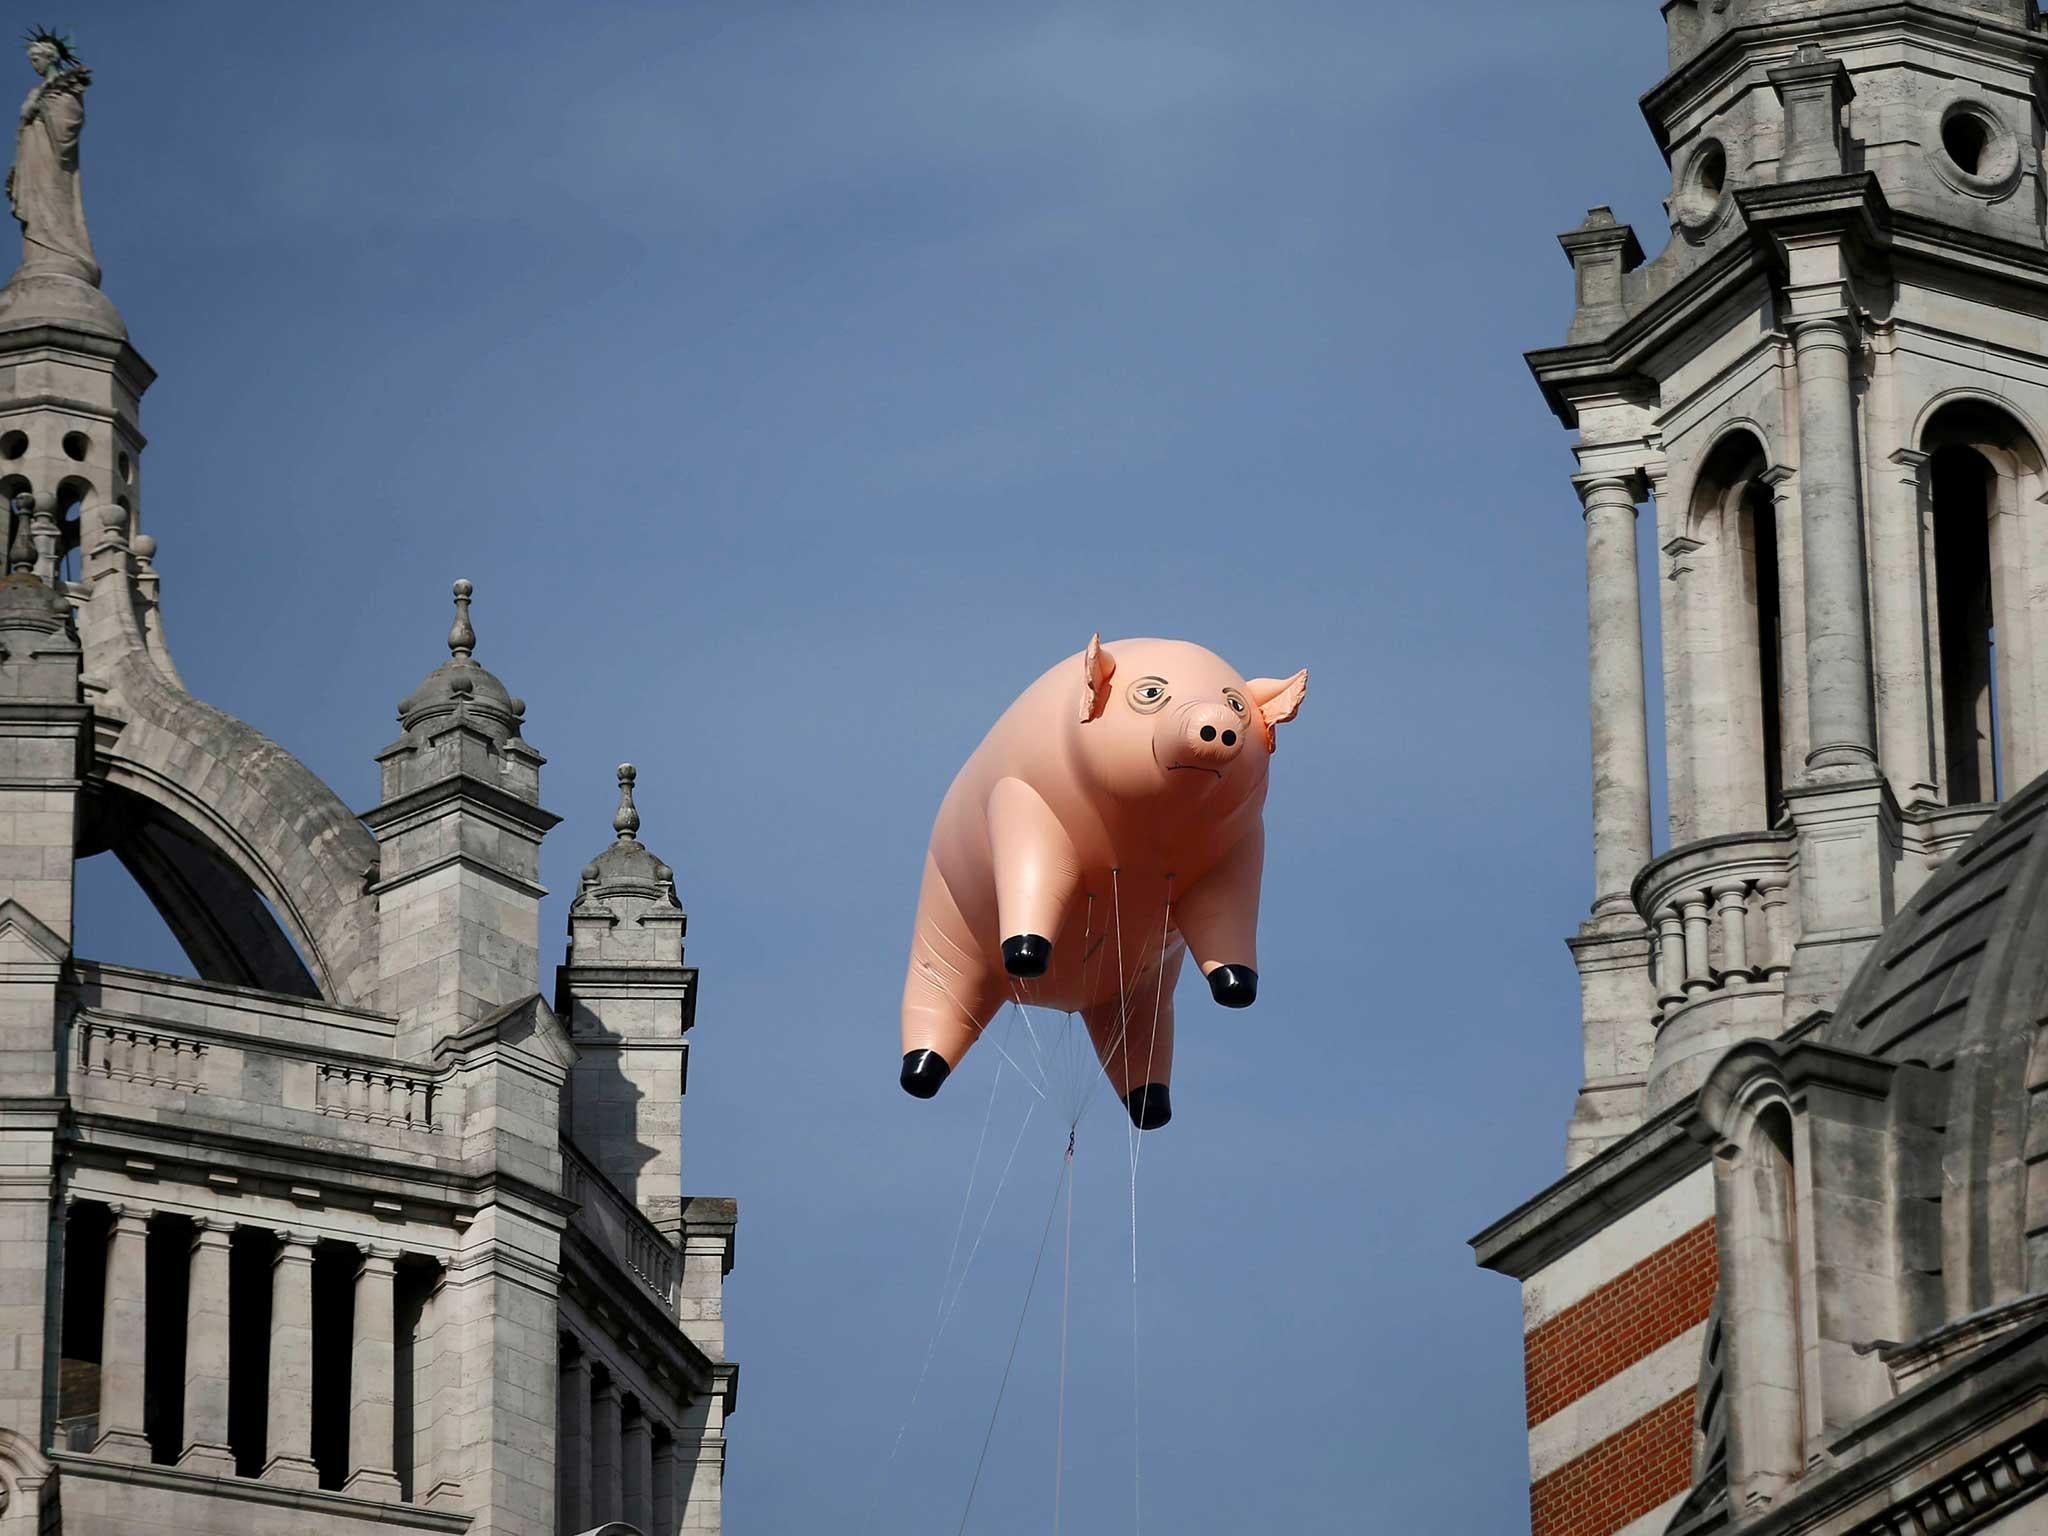 Pink Floyd famously used pig props in their dynamic live shows